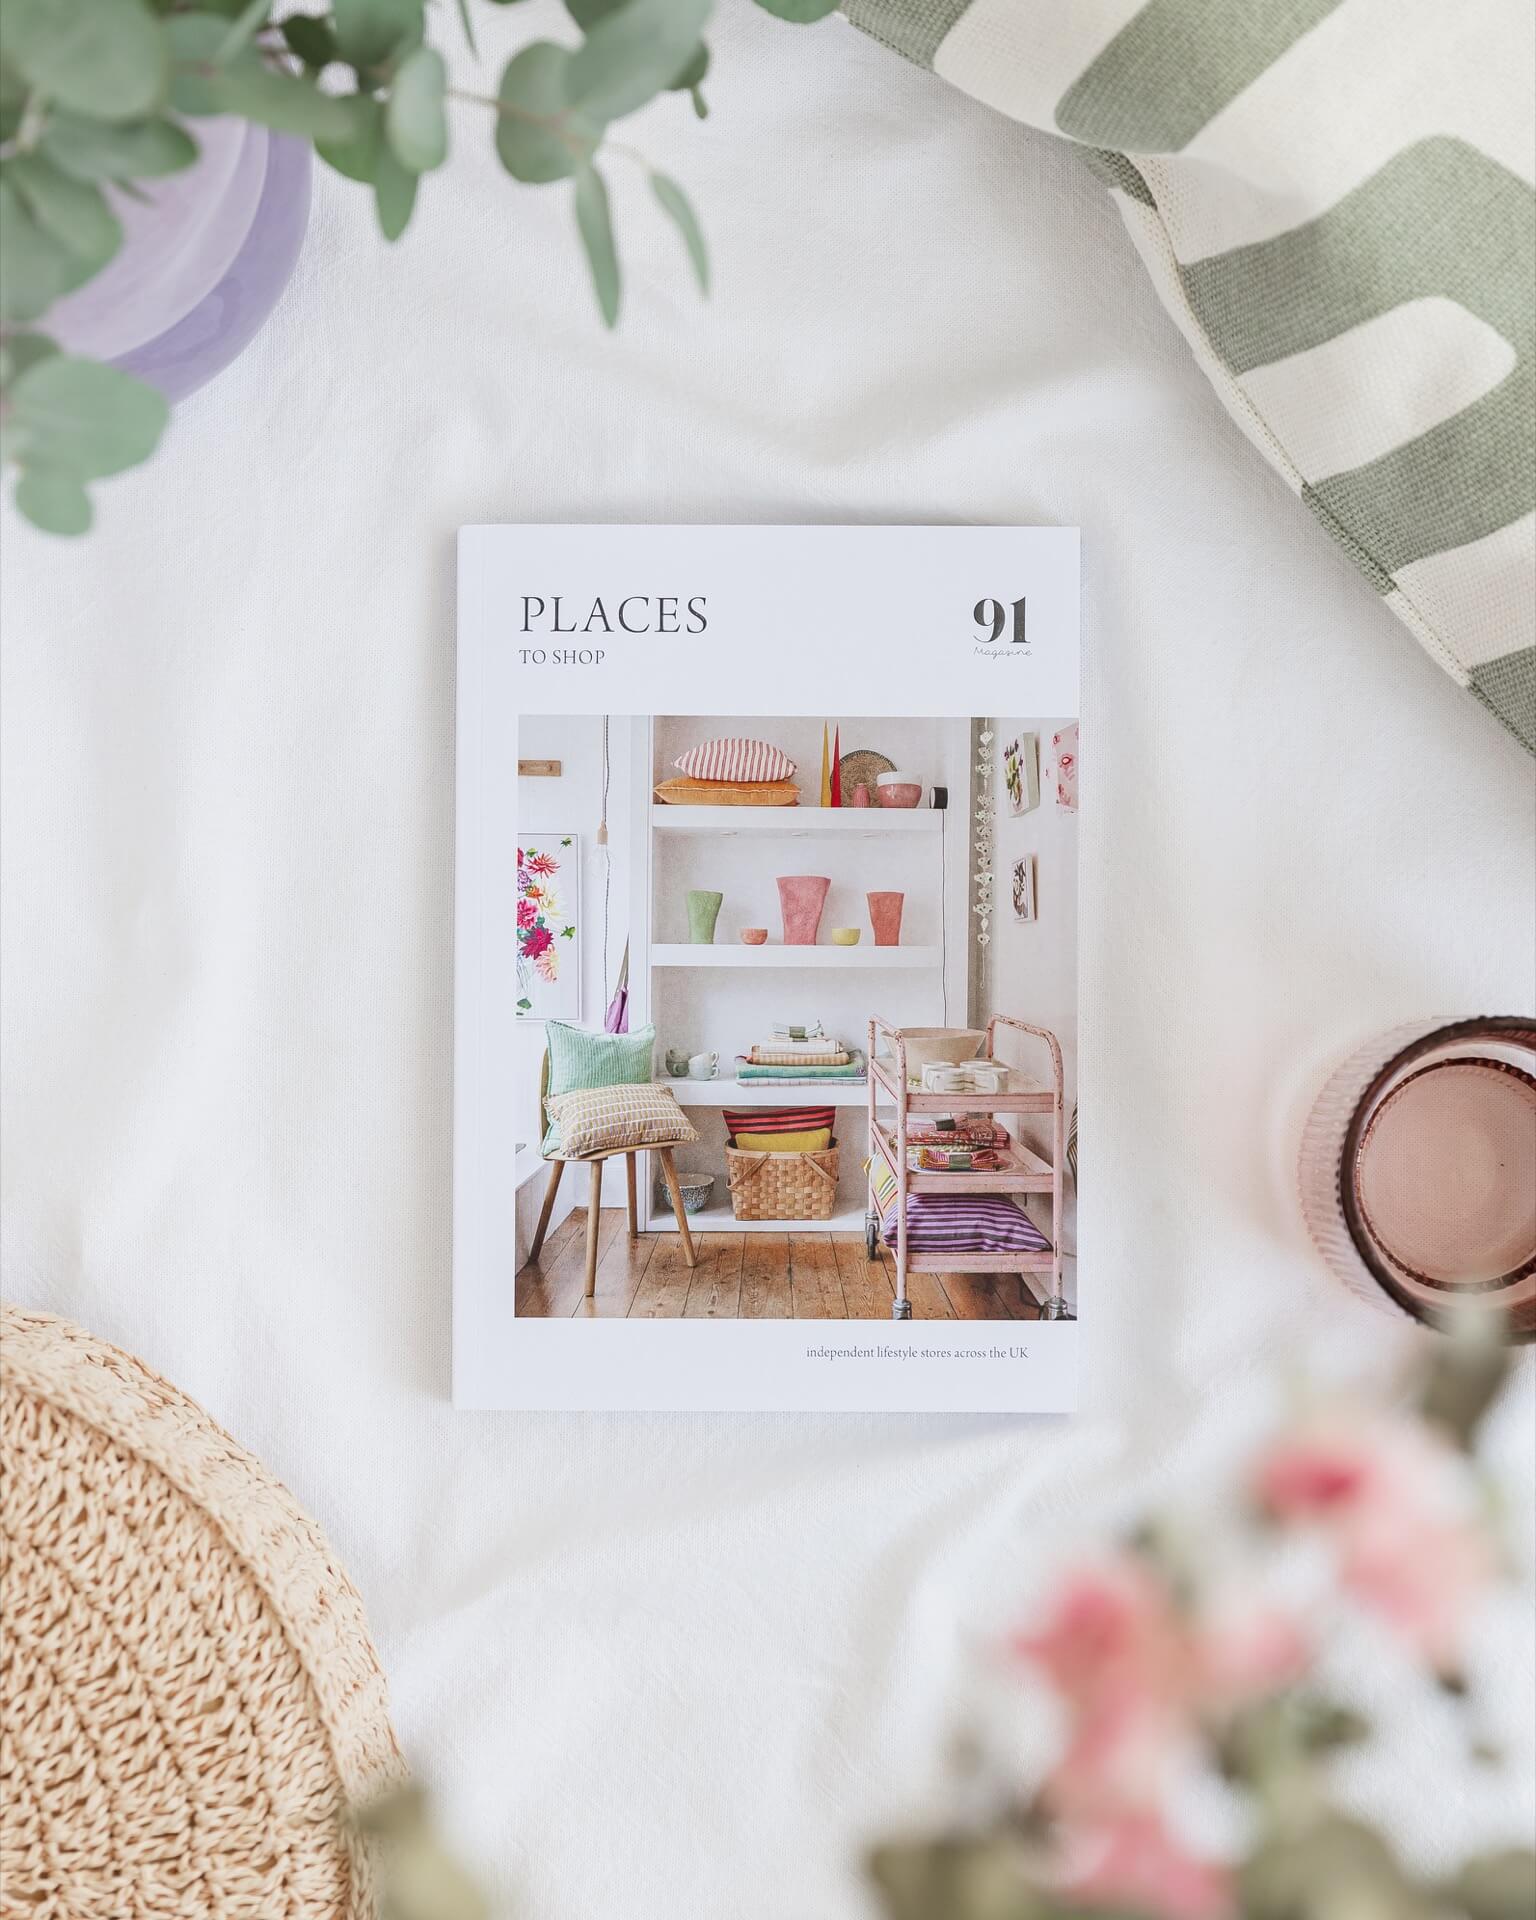 91 Magazine book - PLACES TO SHOP - independent lifestyle stores across the UK 